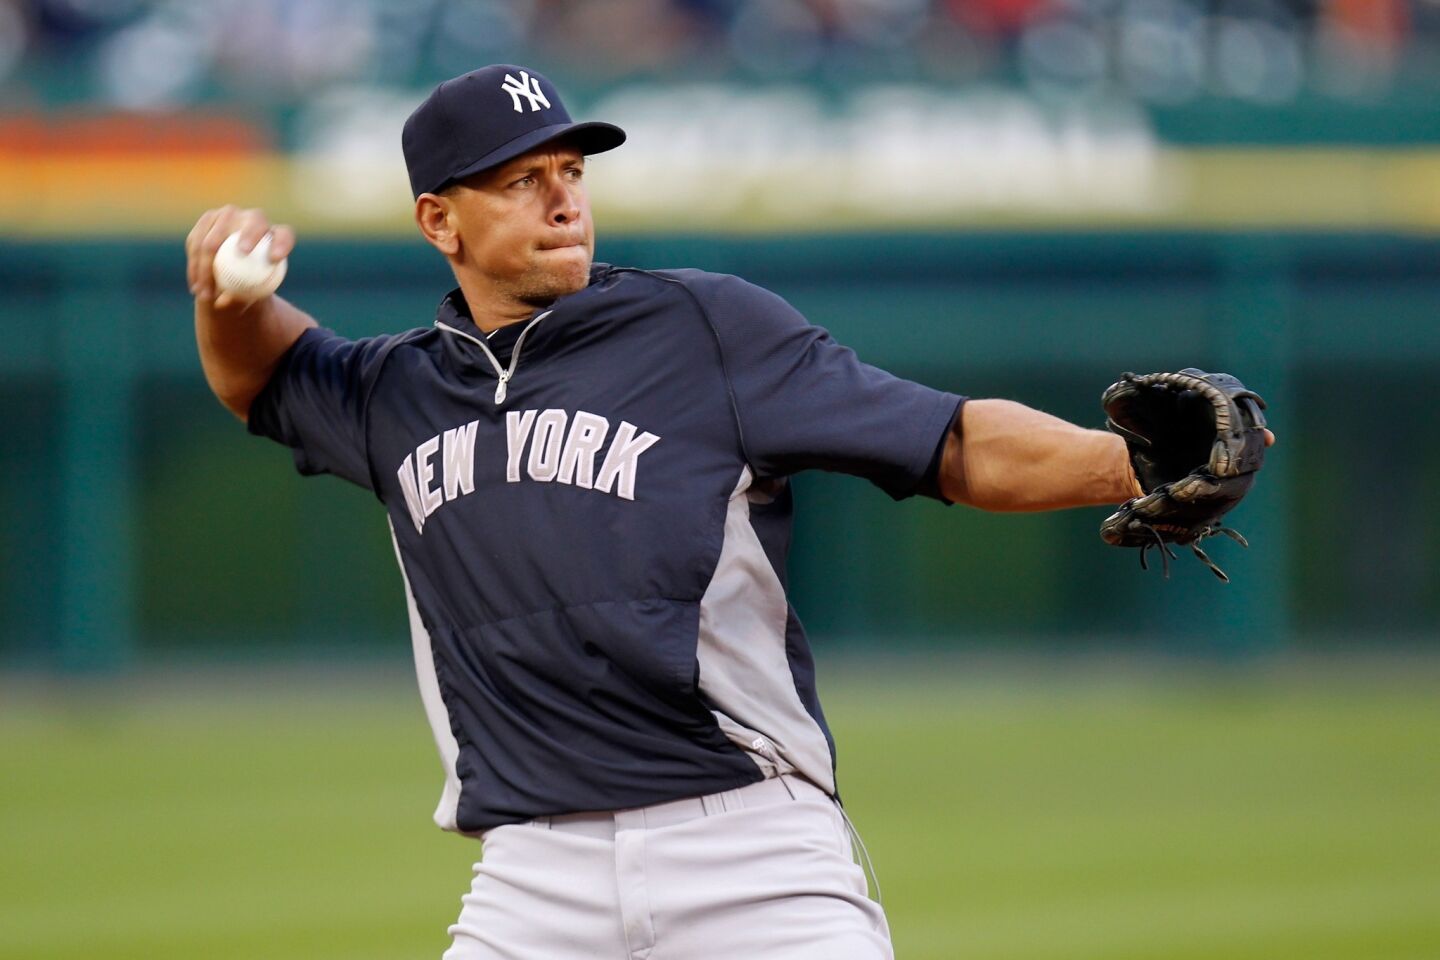 New York Yankees third baseman Alex Rodriguez, who has not played this season while recovering from hip surgery, was suspended until after the 2014 season by Major League Baseball over allegations of use of performance-enhancing drugs. Rodriguez will be allowed to play while his suspension is under appeal.